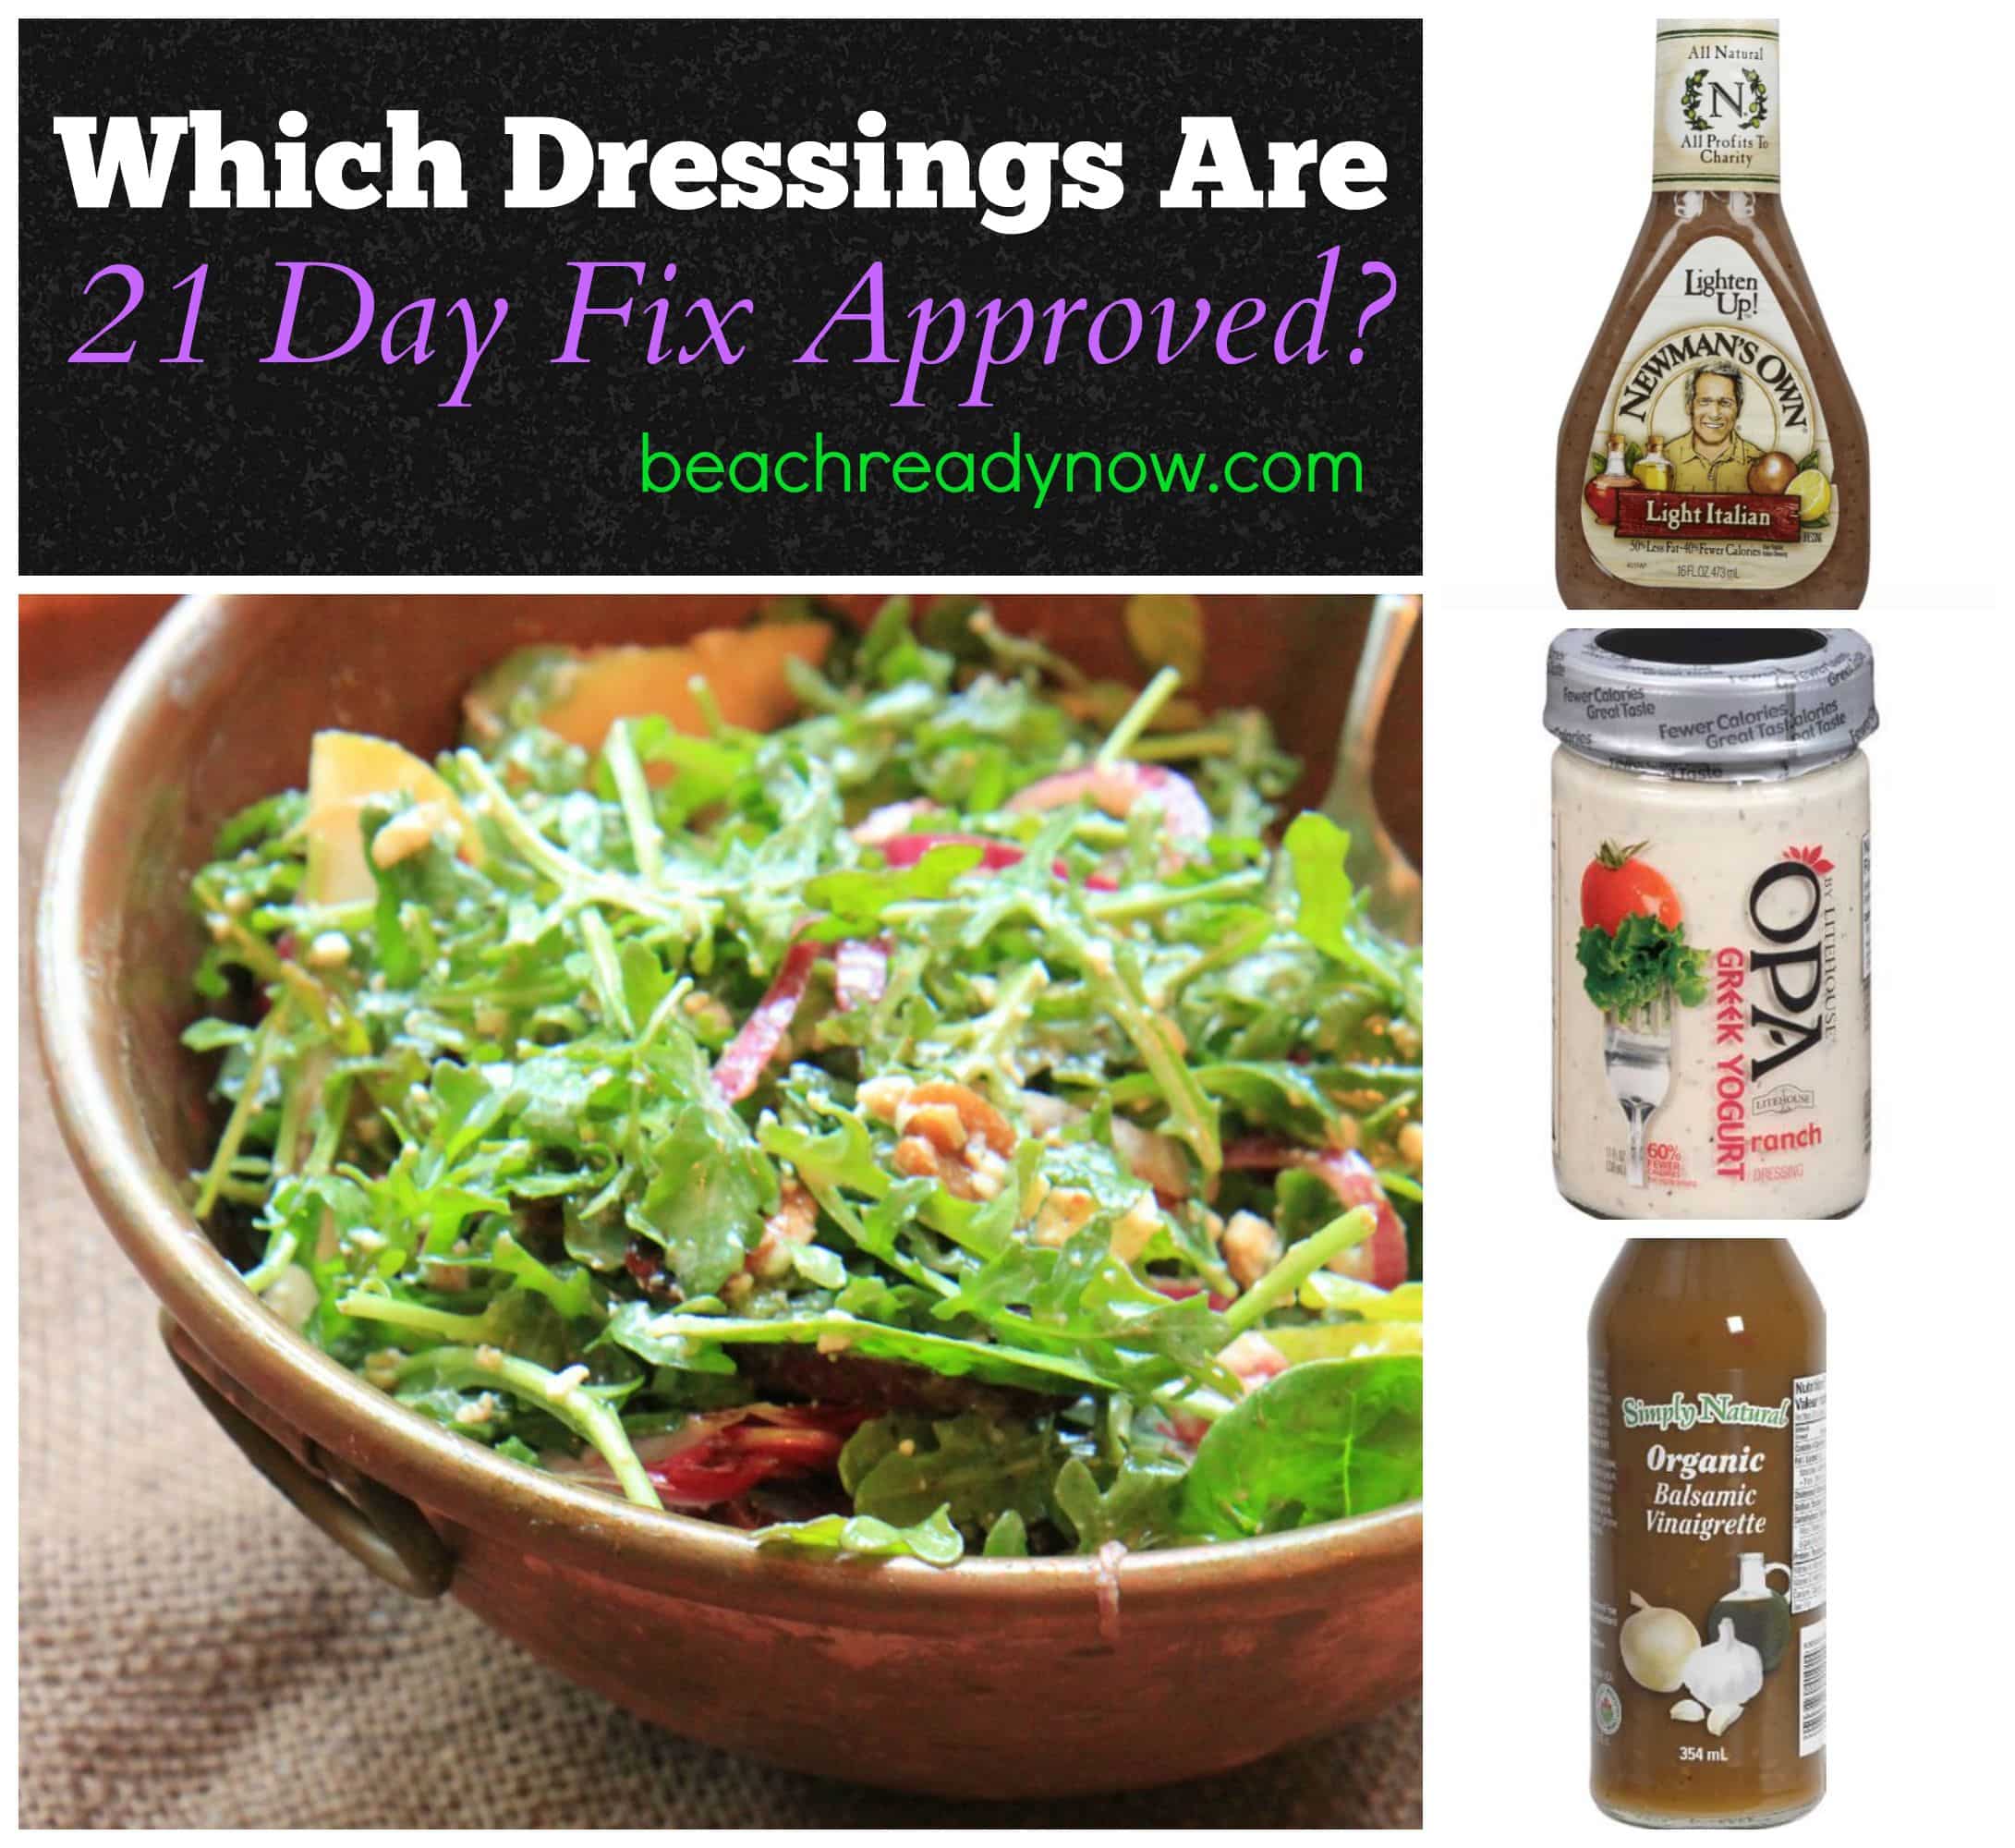 Healthy salad dressing recipes weight loss questions and answers